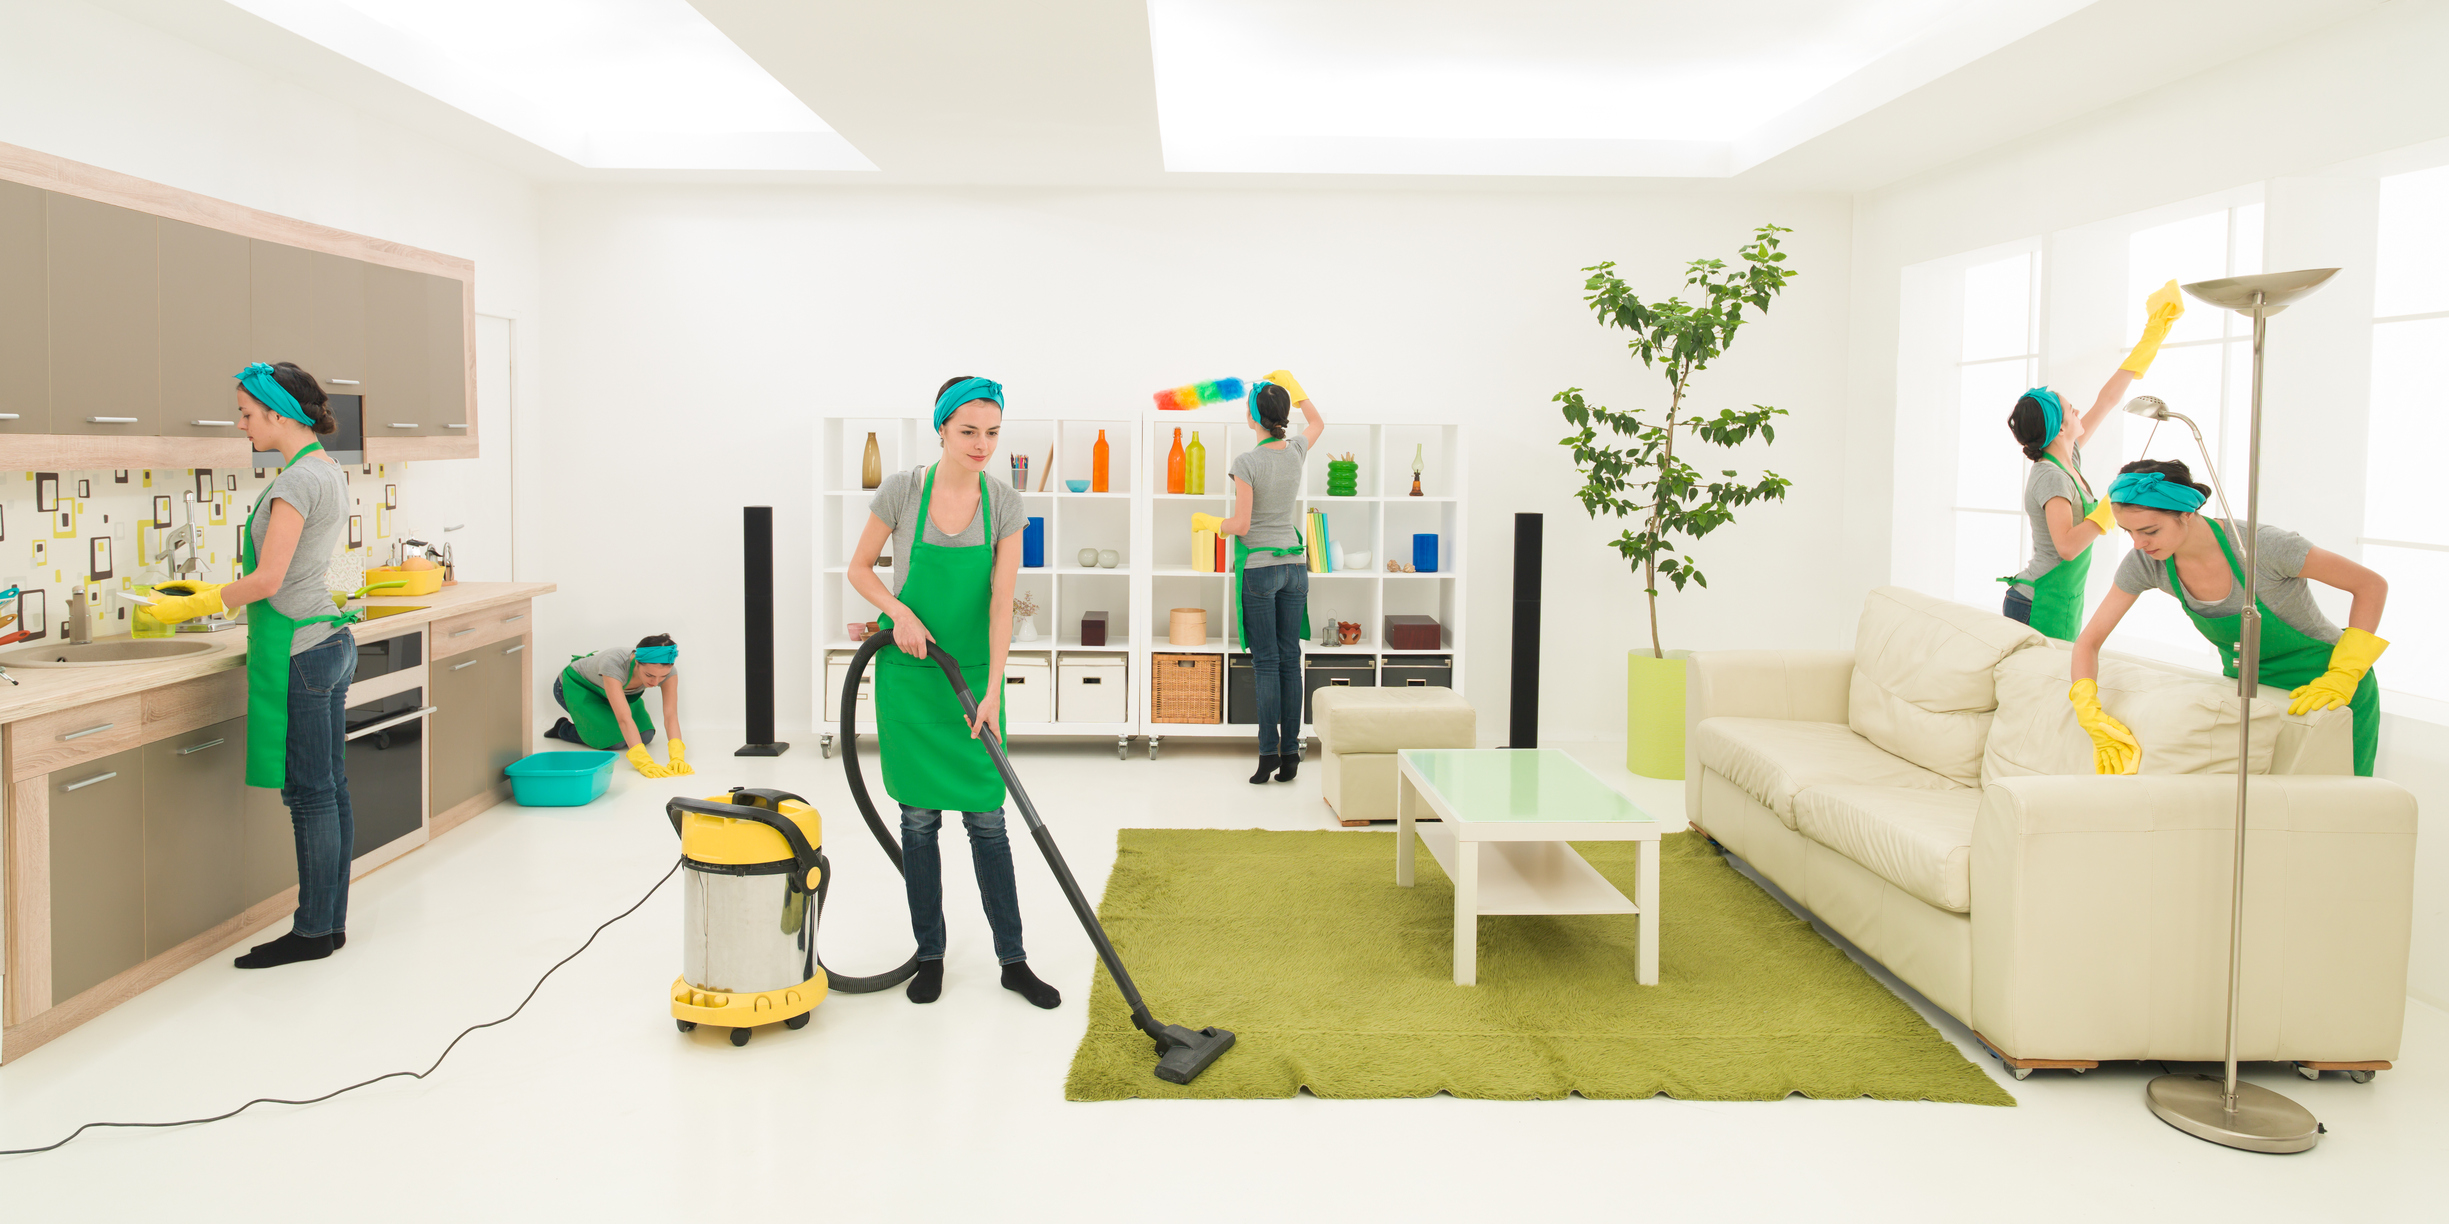 Making Your Spaces Clean, Disinfect, Healthy, Safe